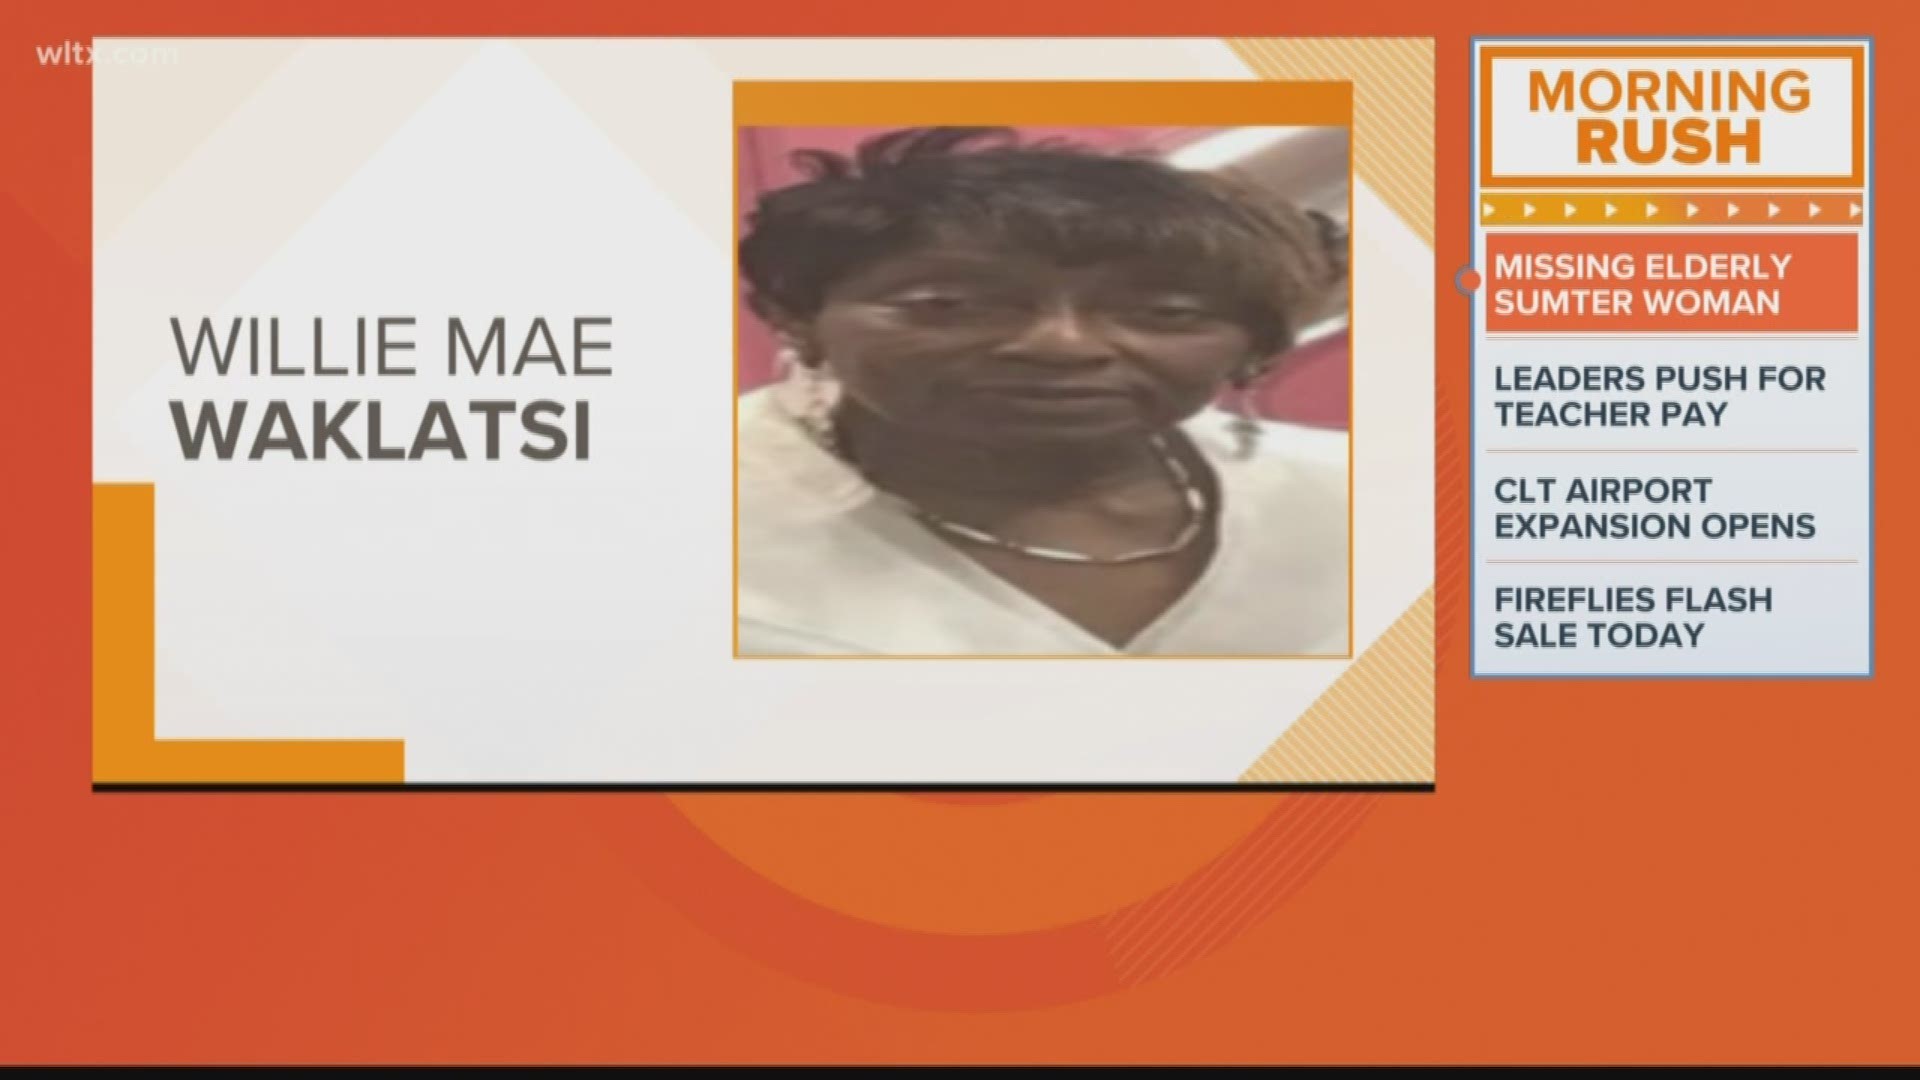 Sumter police need your help finding missing 80-year-old Willie Mae Waklatsi.